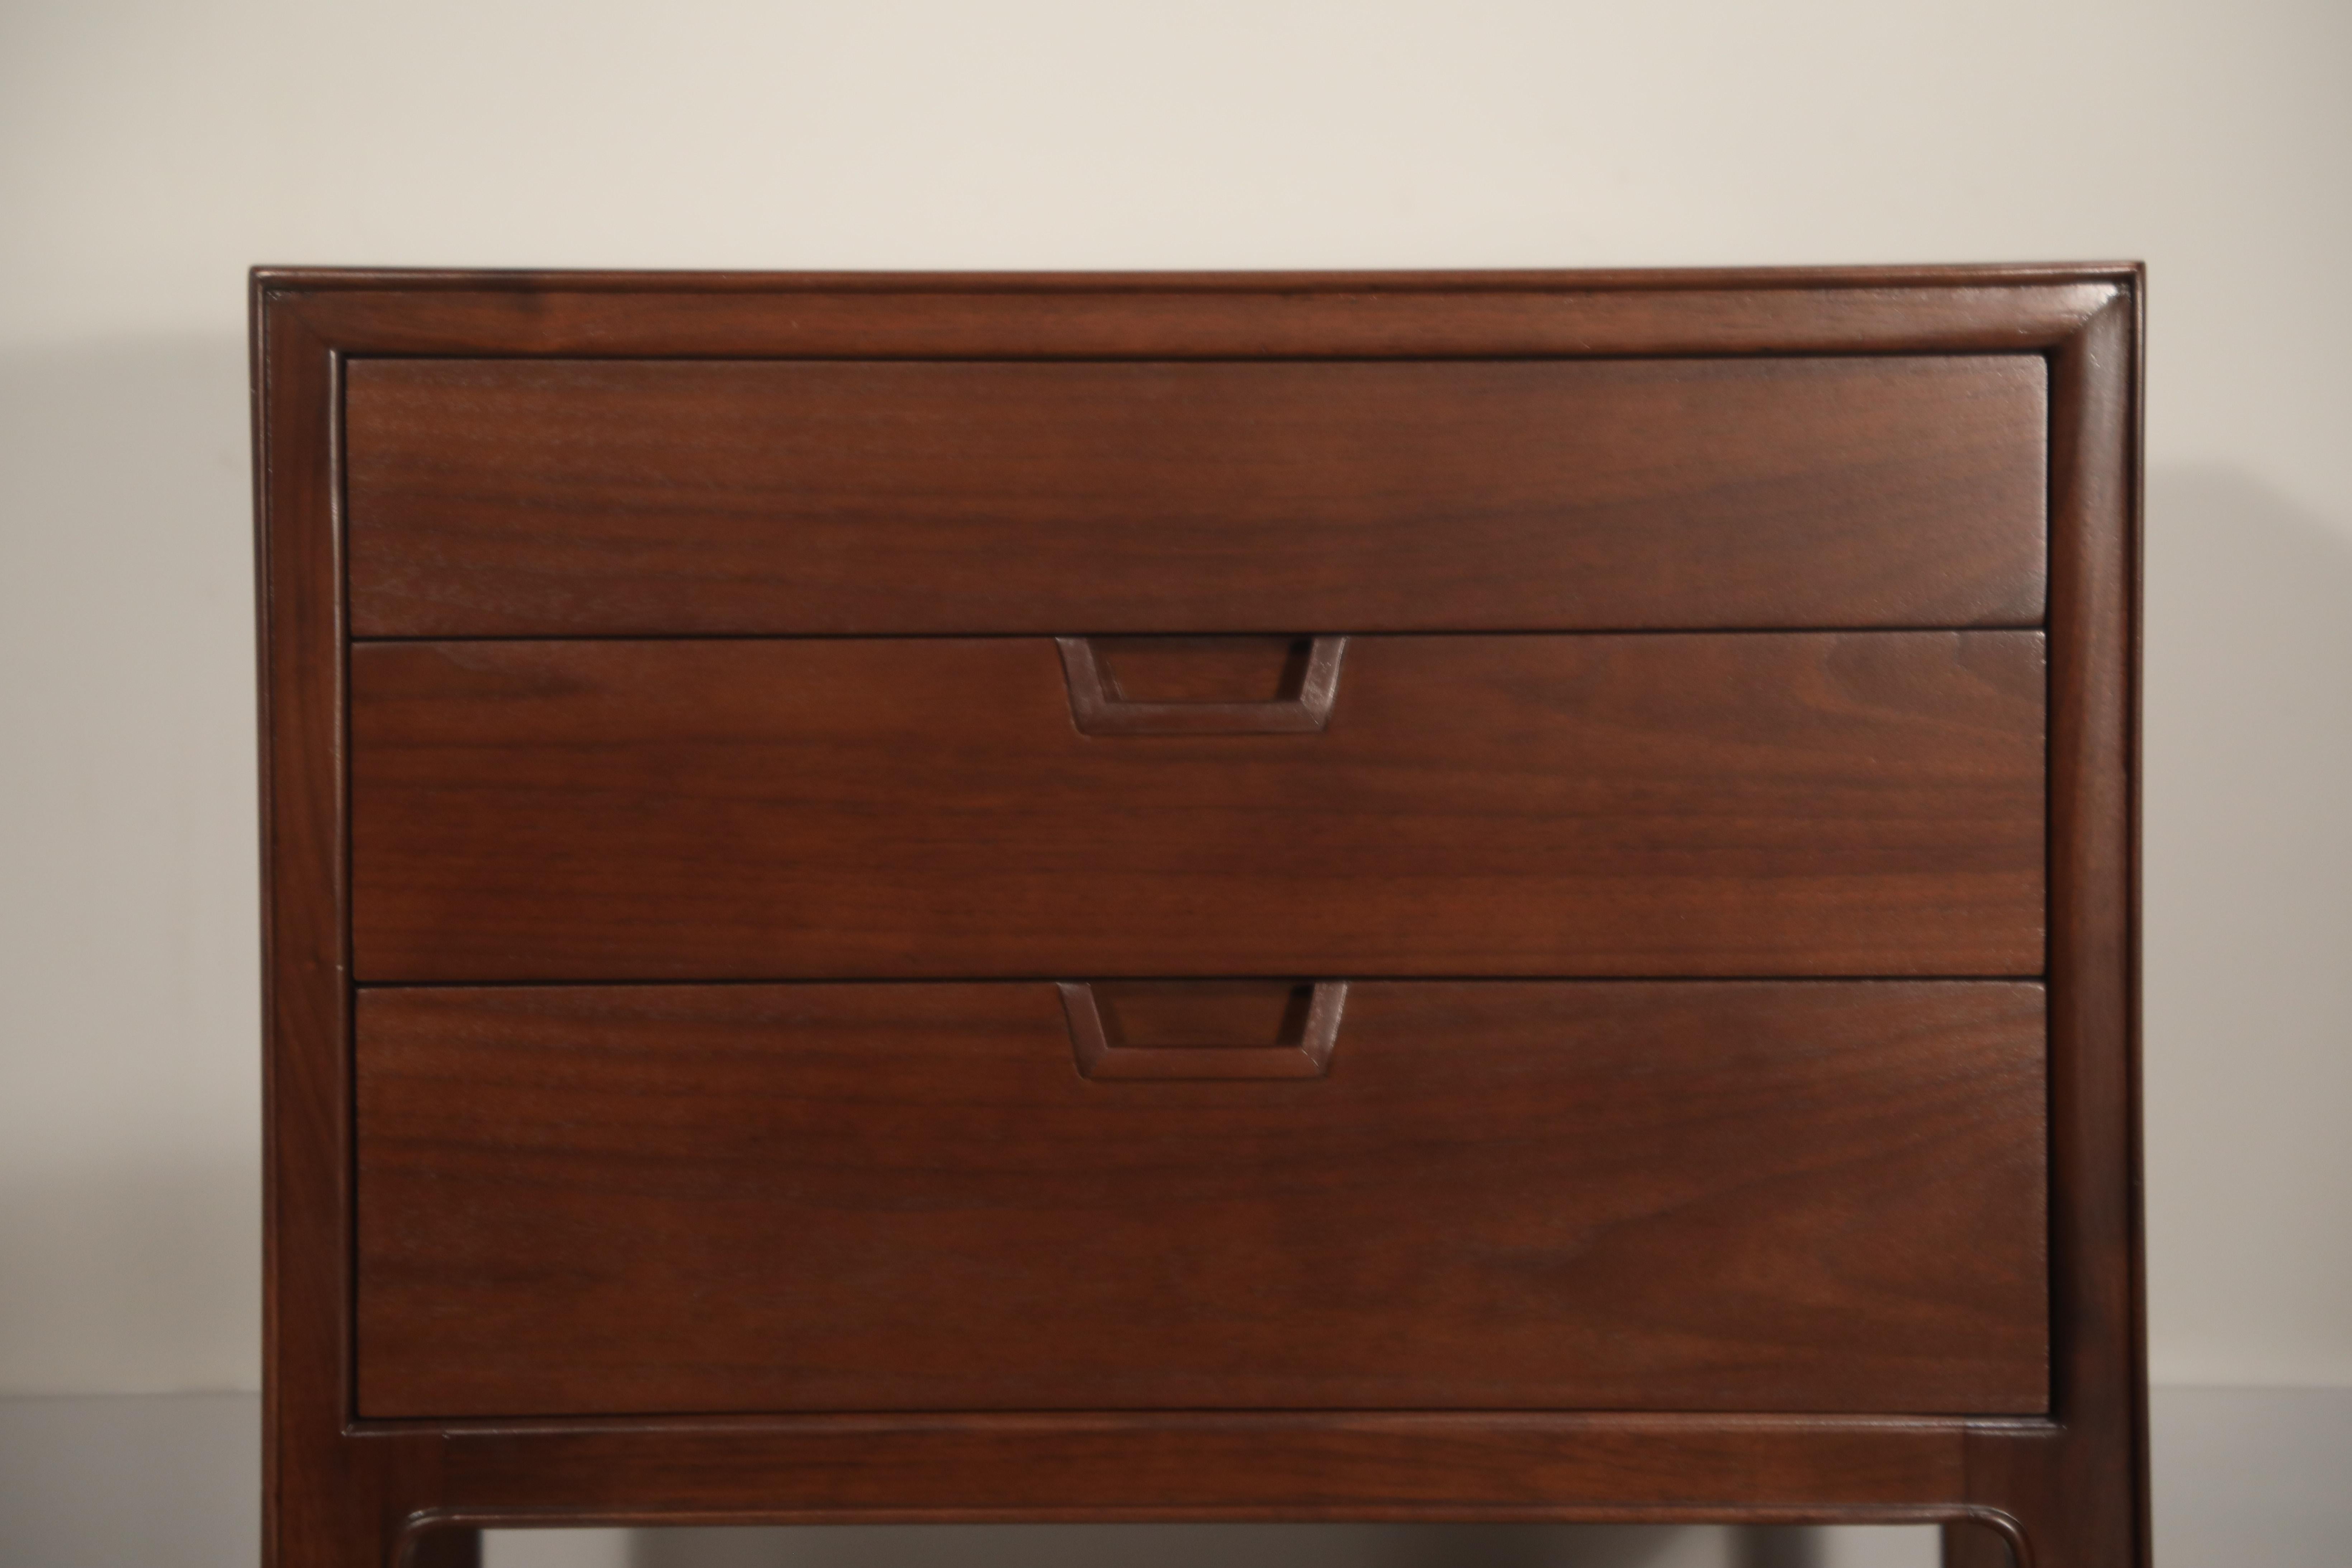 Walnut Pair of Refinished Nightstands or End Tables by John Stuart for Janus Collection